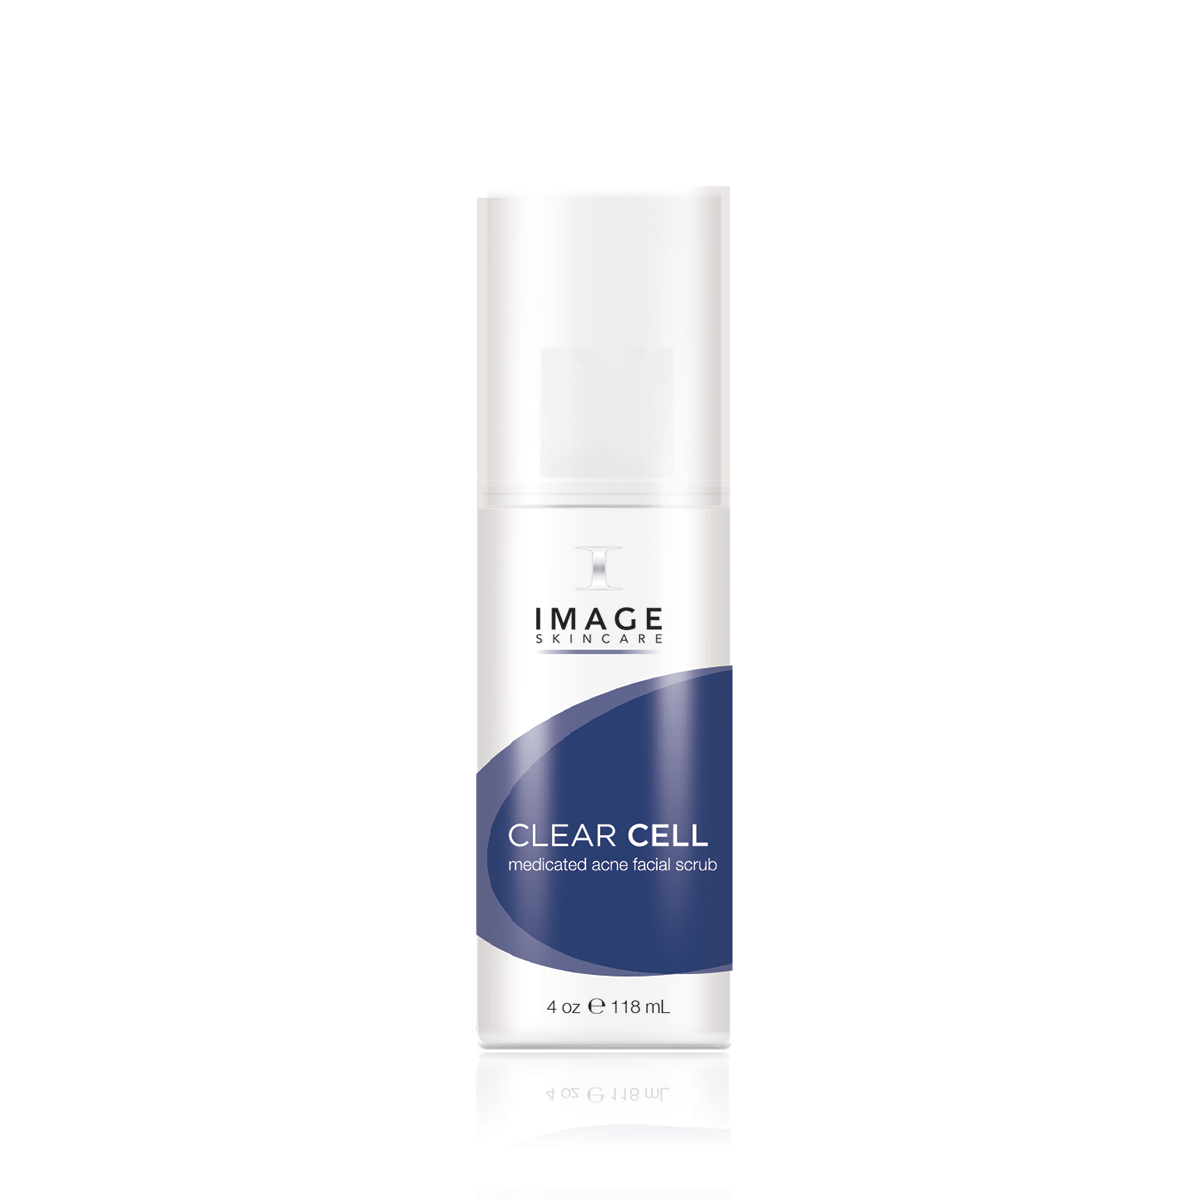 Image Skin Clear Cell лосьон. Clear Cell Salicylic Clarifying Tonic. Эмульсия анти акне image. Clear Cell Salicylic Gel Cleanser.